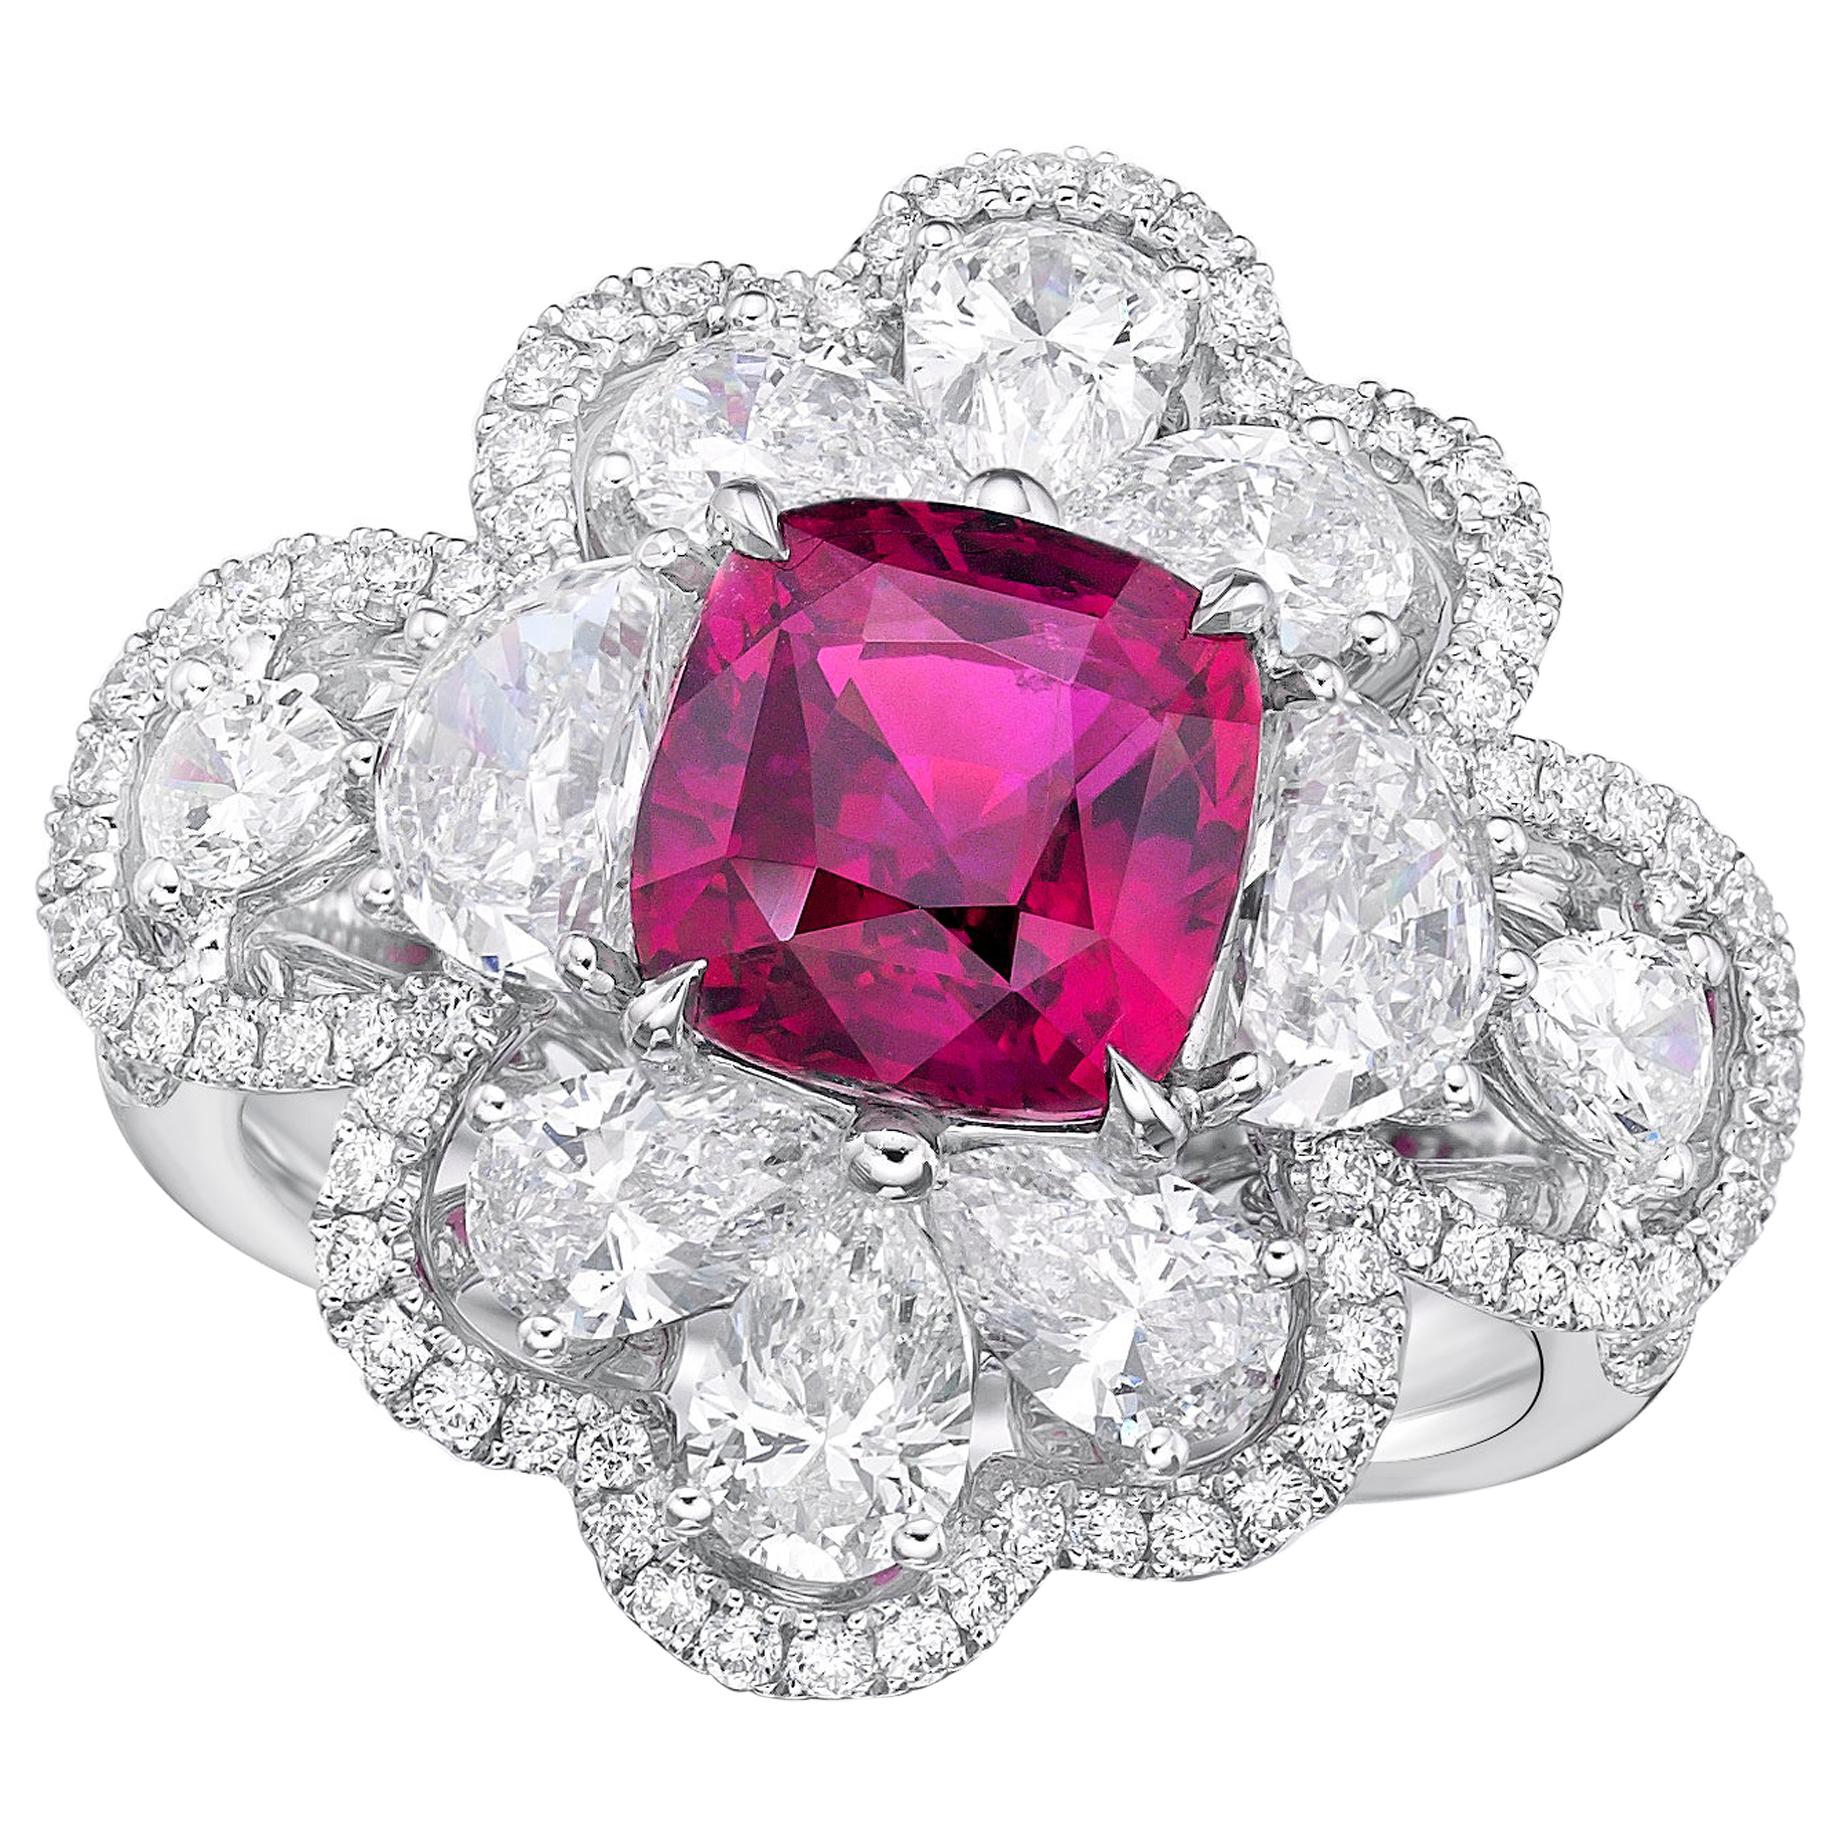 KAHN GRS Certified 3.11 Carat Unheated Pink Sapphire Ring For Sale